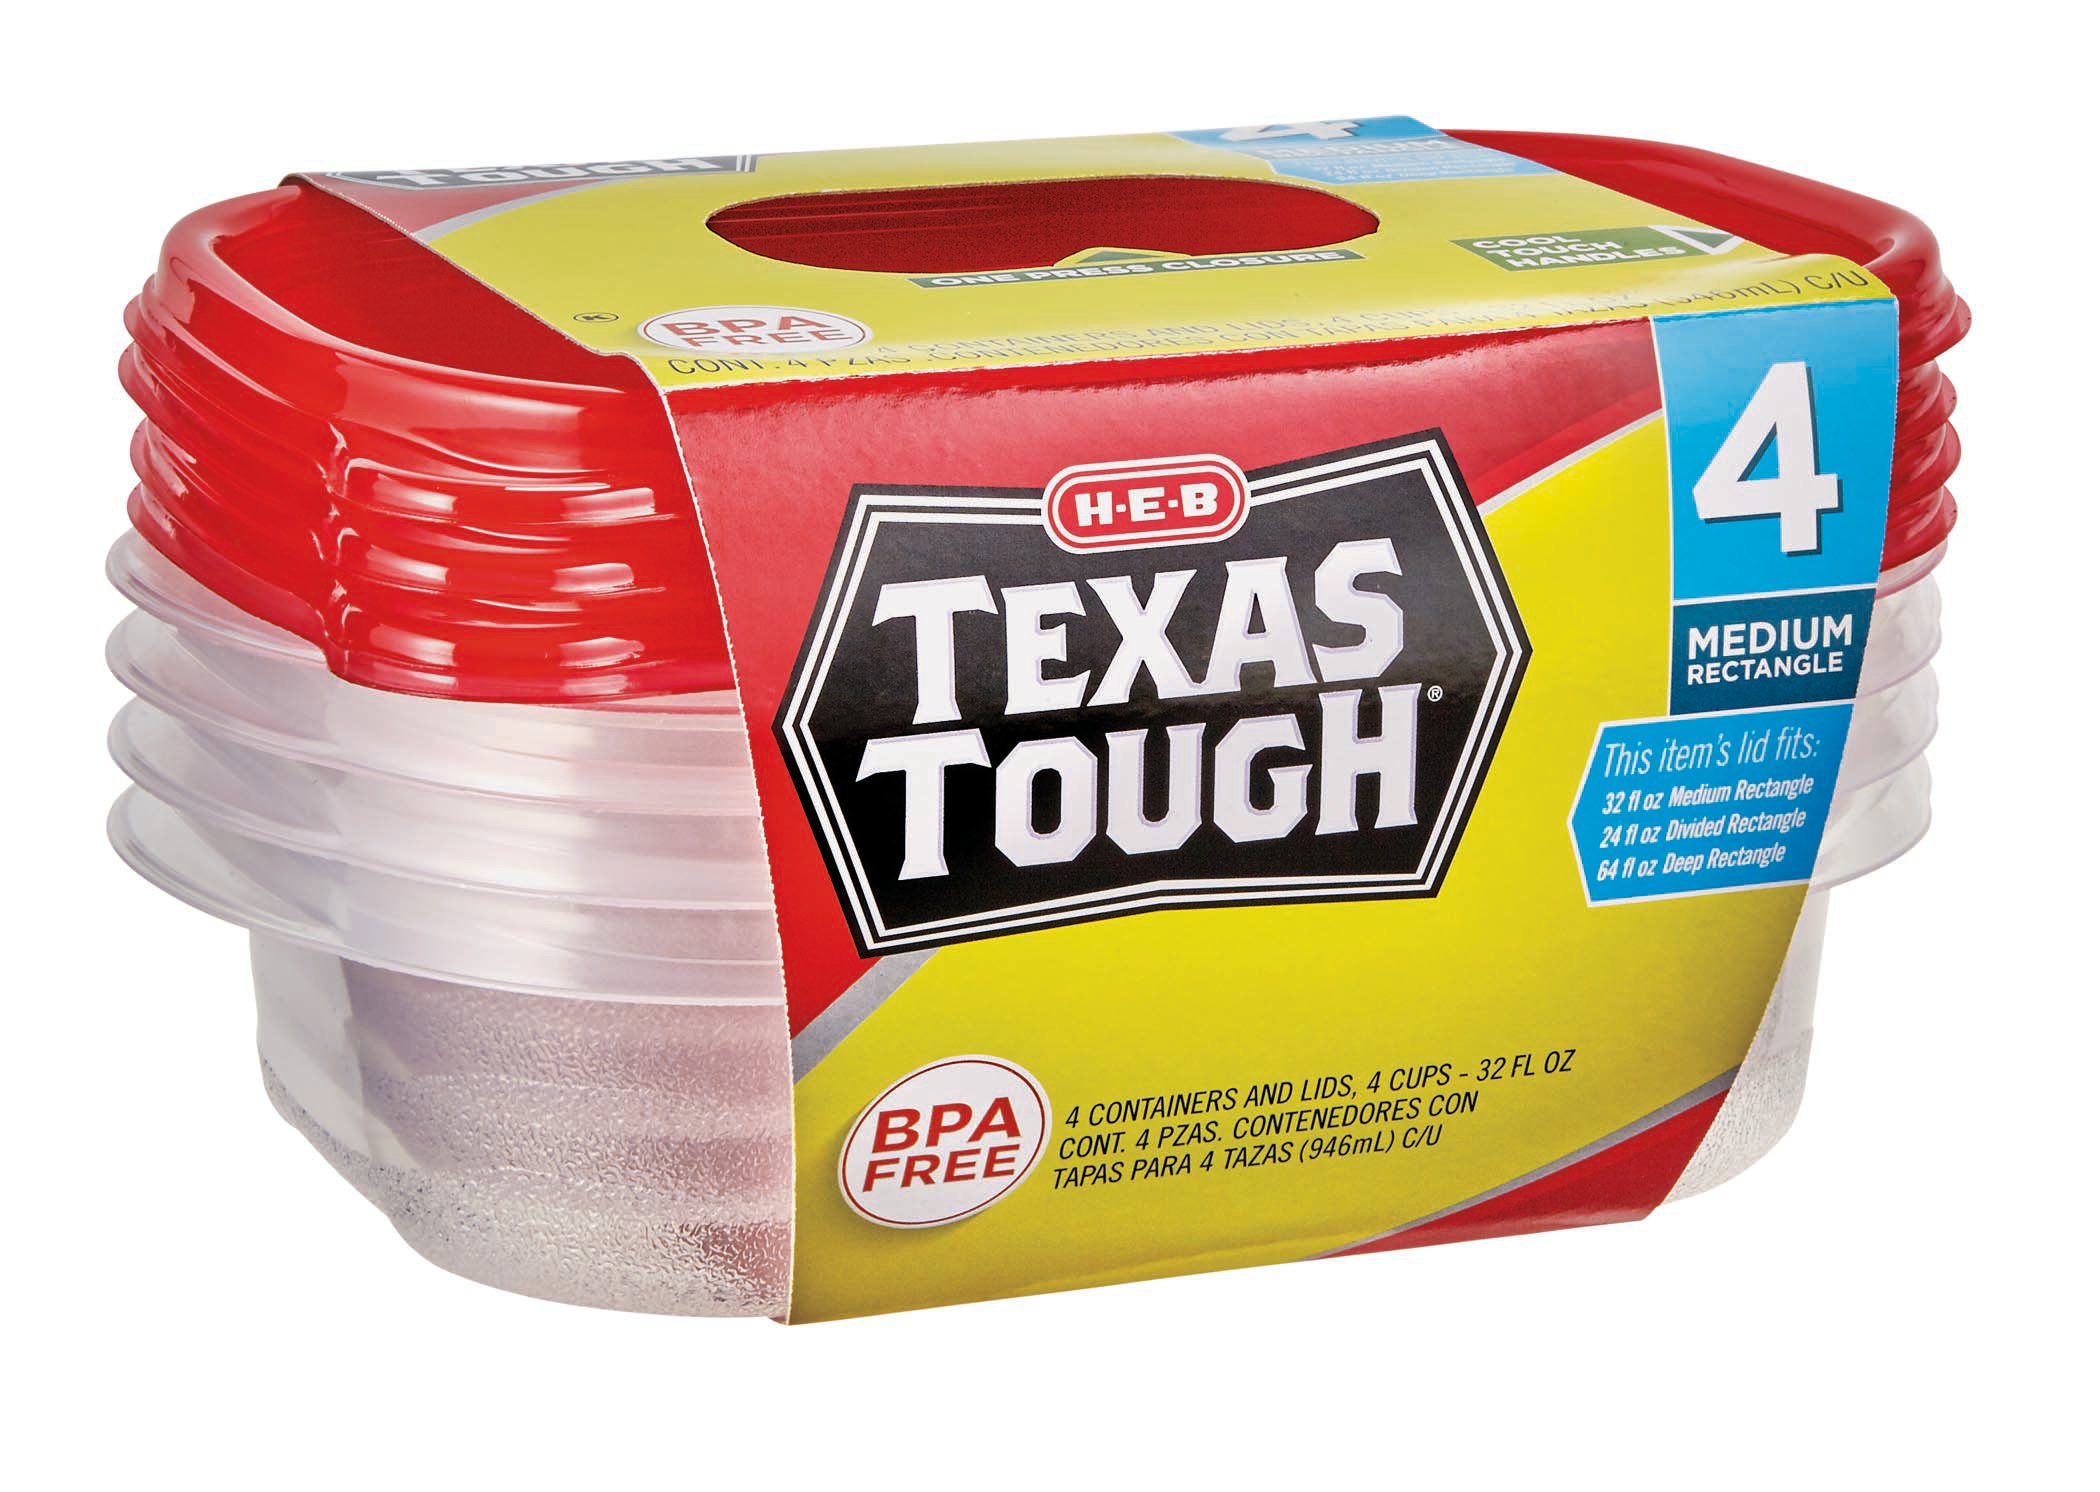 H-E-B Texas Tough Snack-N-Go Reusable Containers with Lids - Shop Containers  at H-E-B